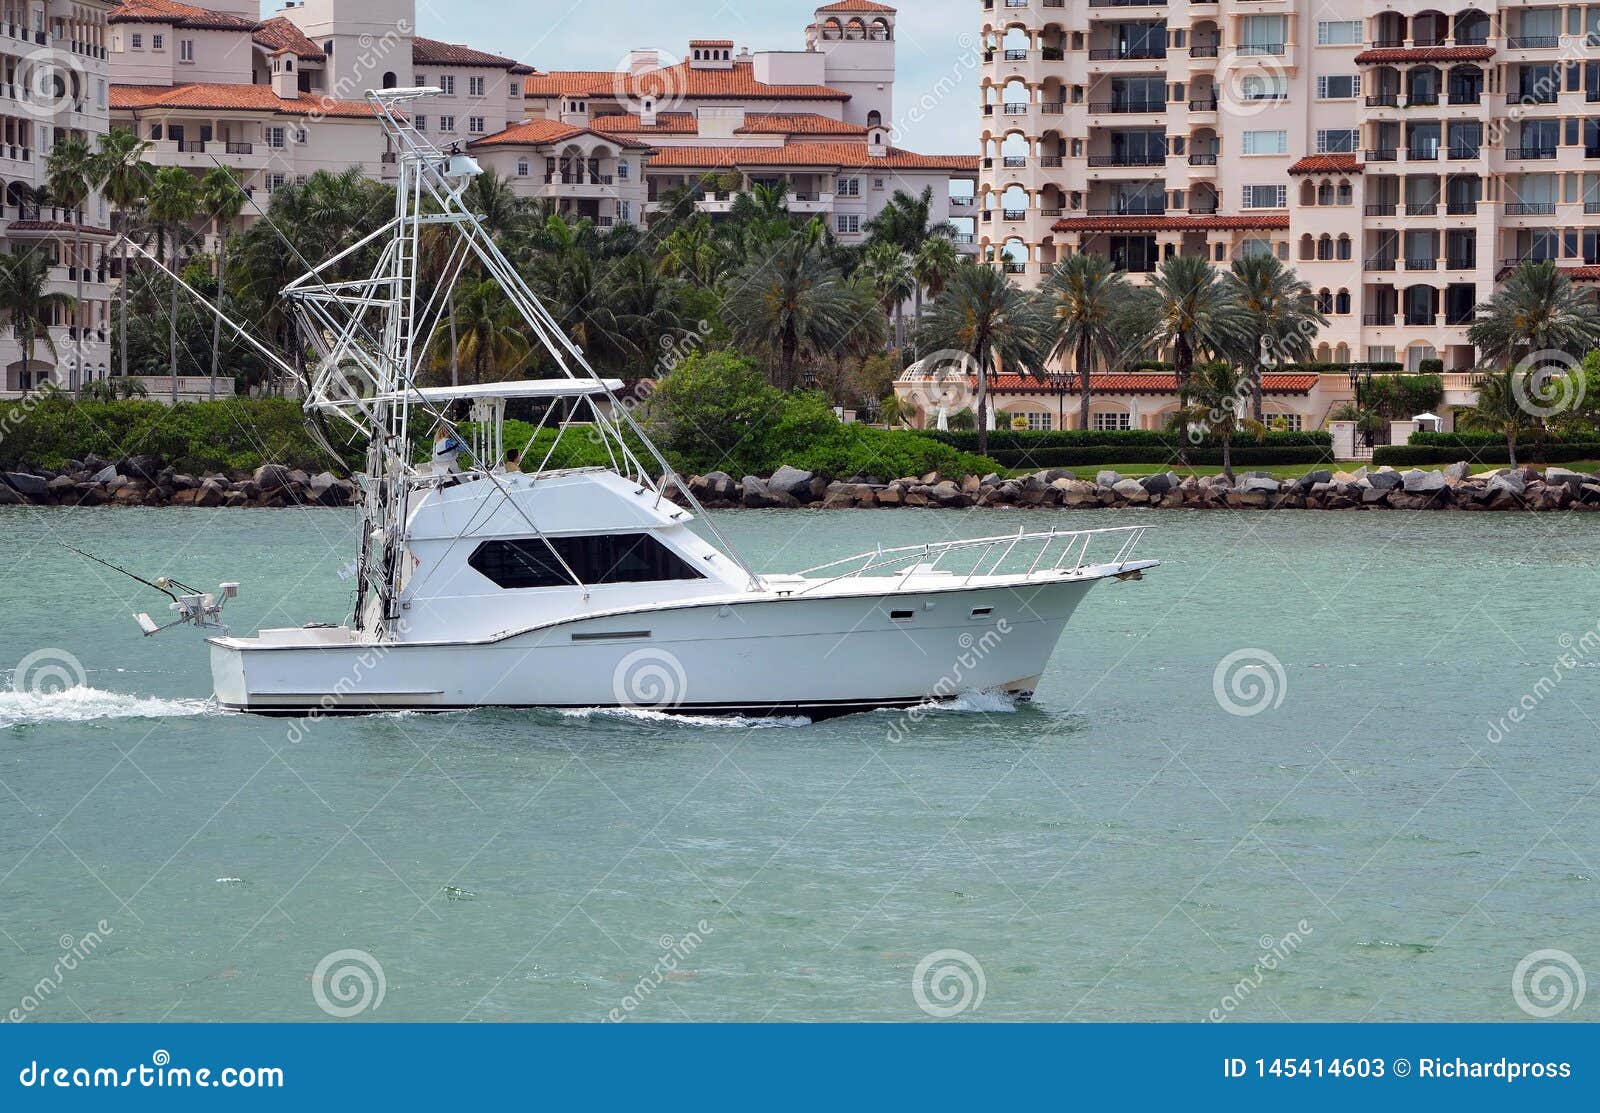 white sport fishing boat with flying bridge returning to port after a morning at sea.